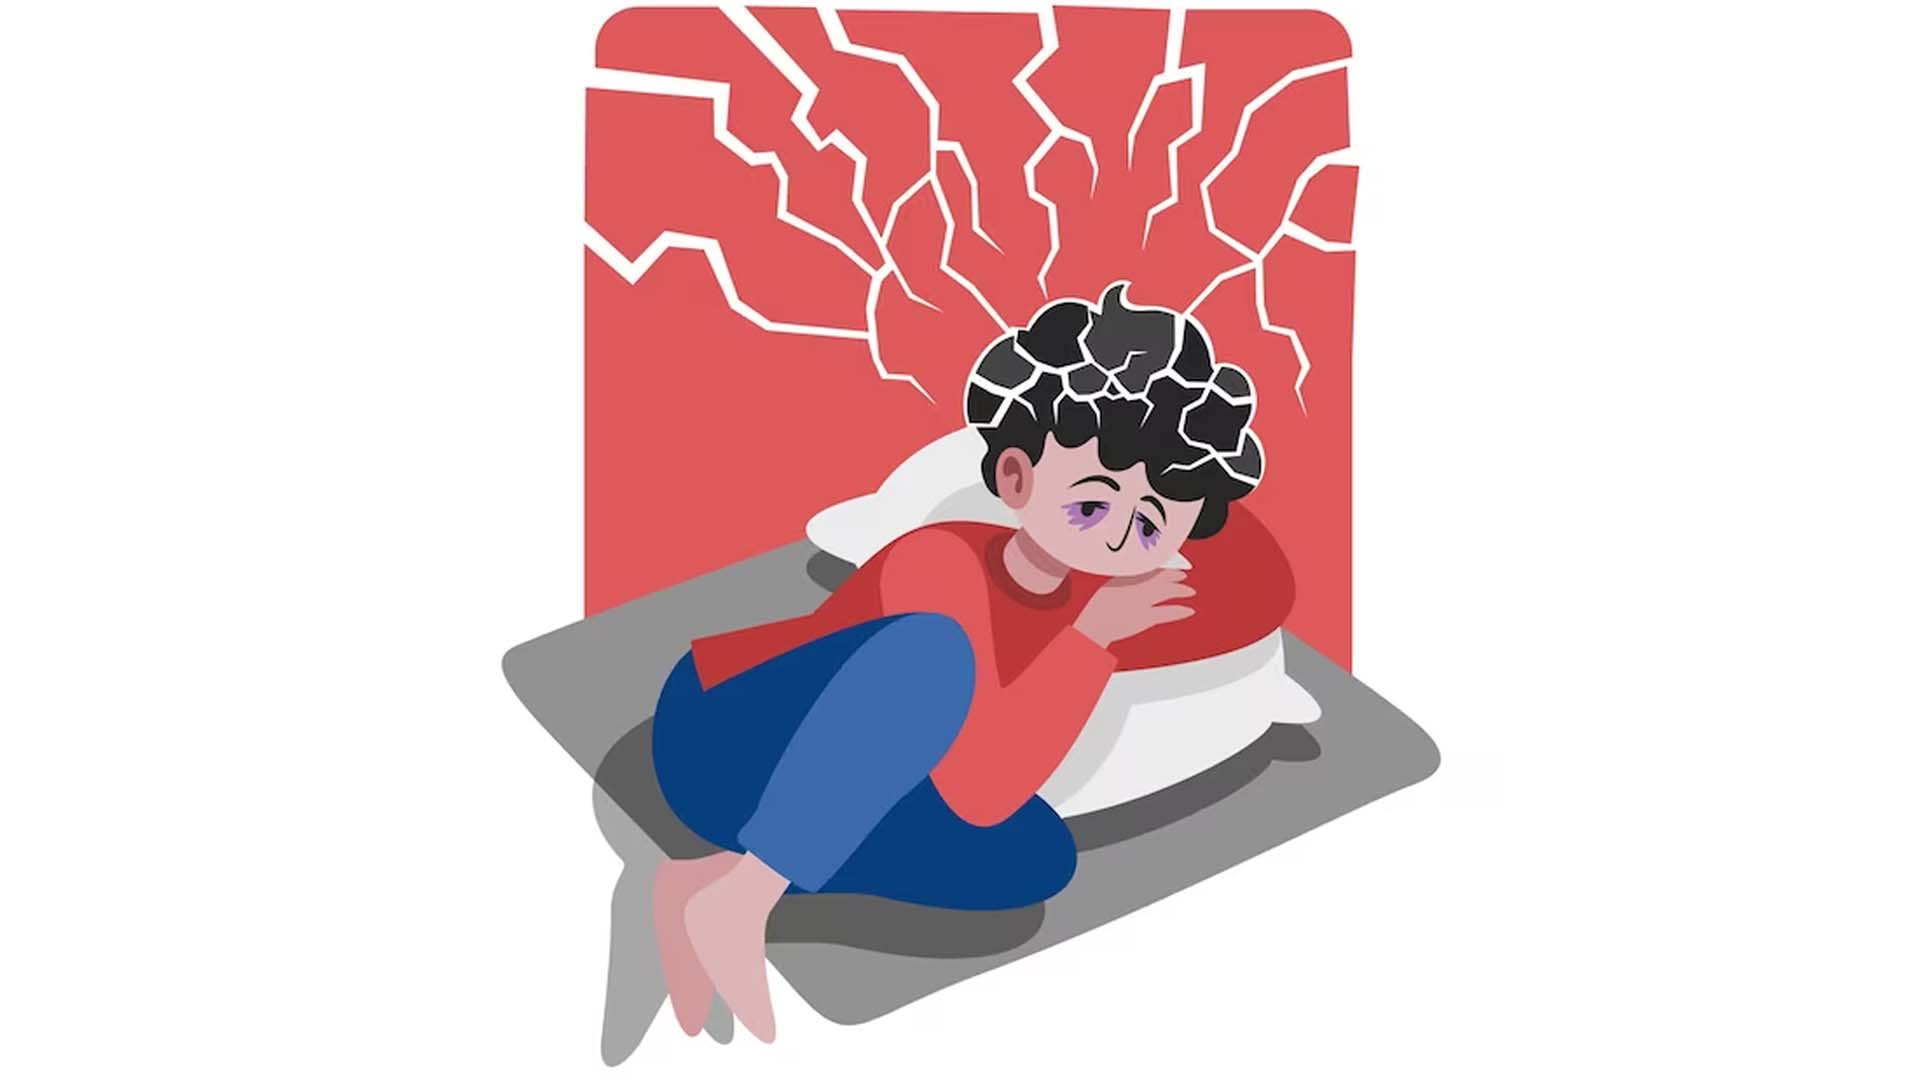 Sitting Person Having Fear in the Brain